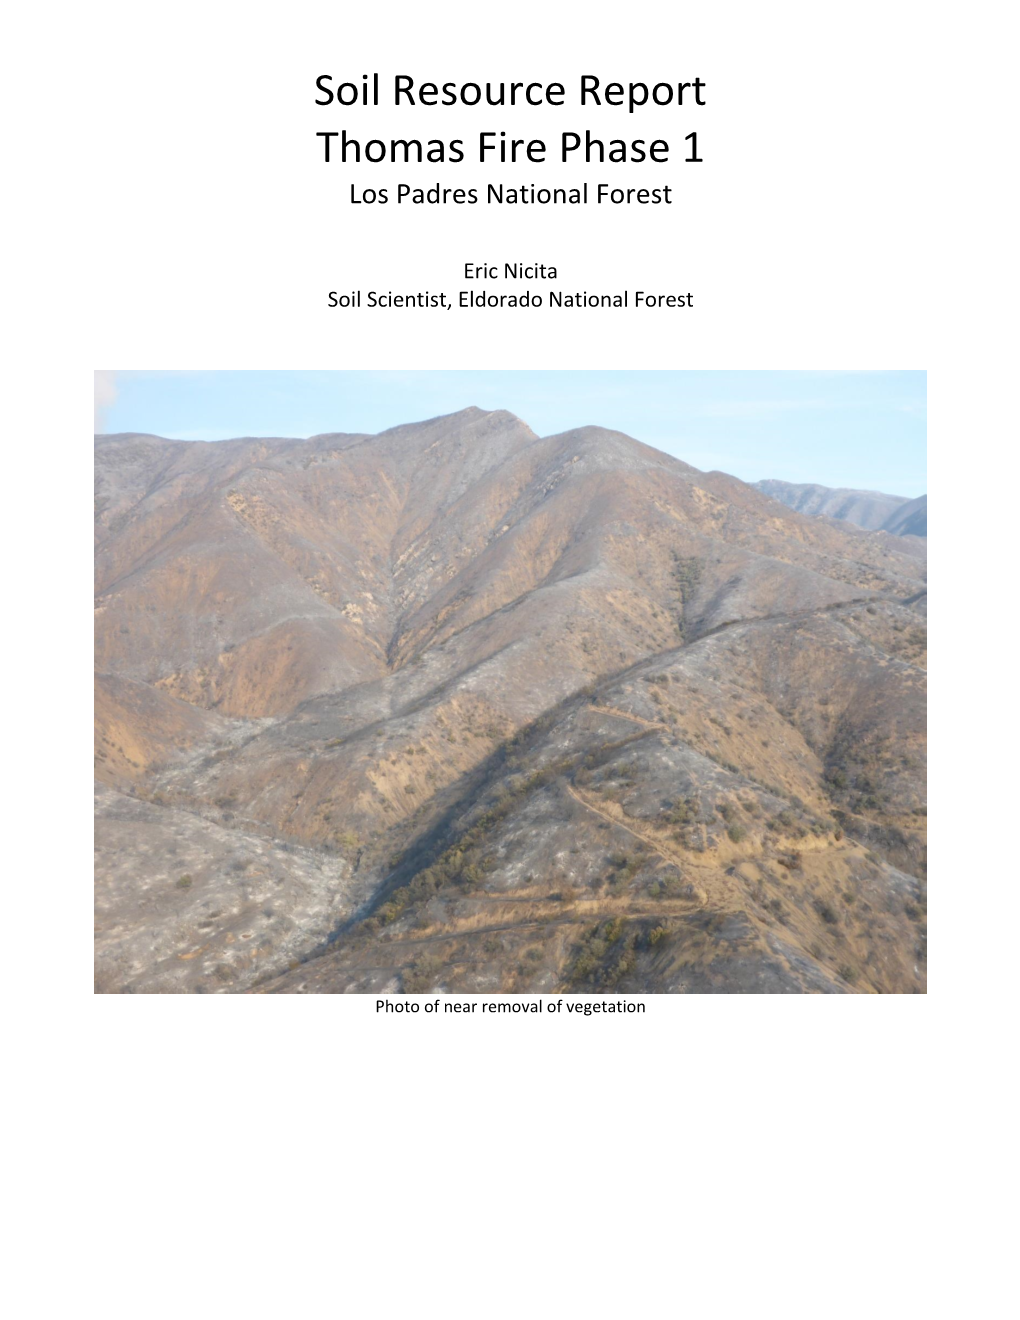 Soil Resource Report Thomas Fire Phase 1 Los Padres National Forest